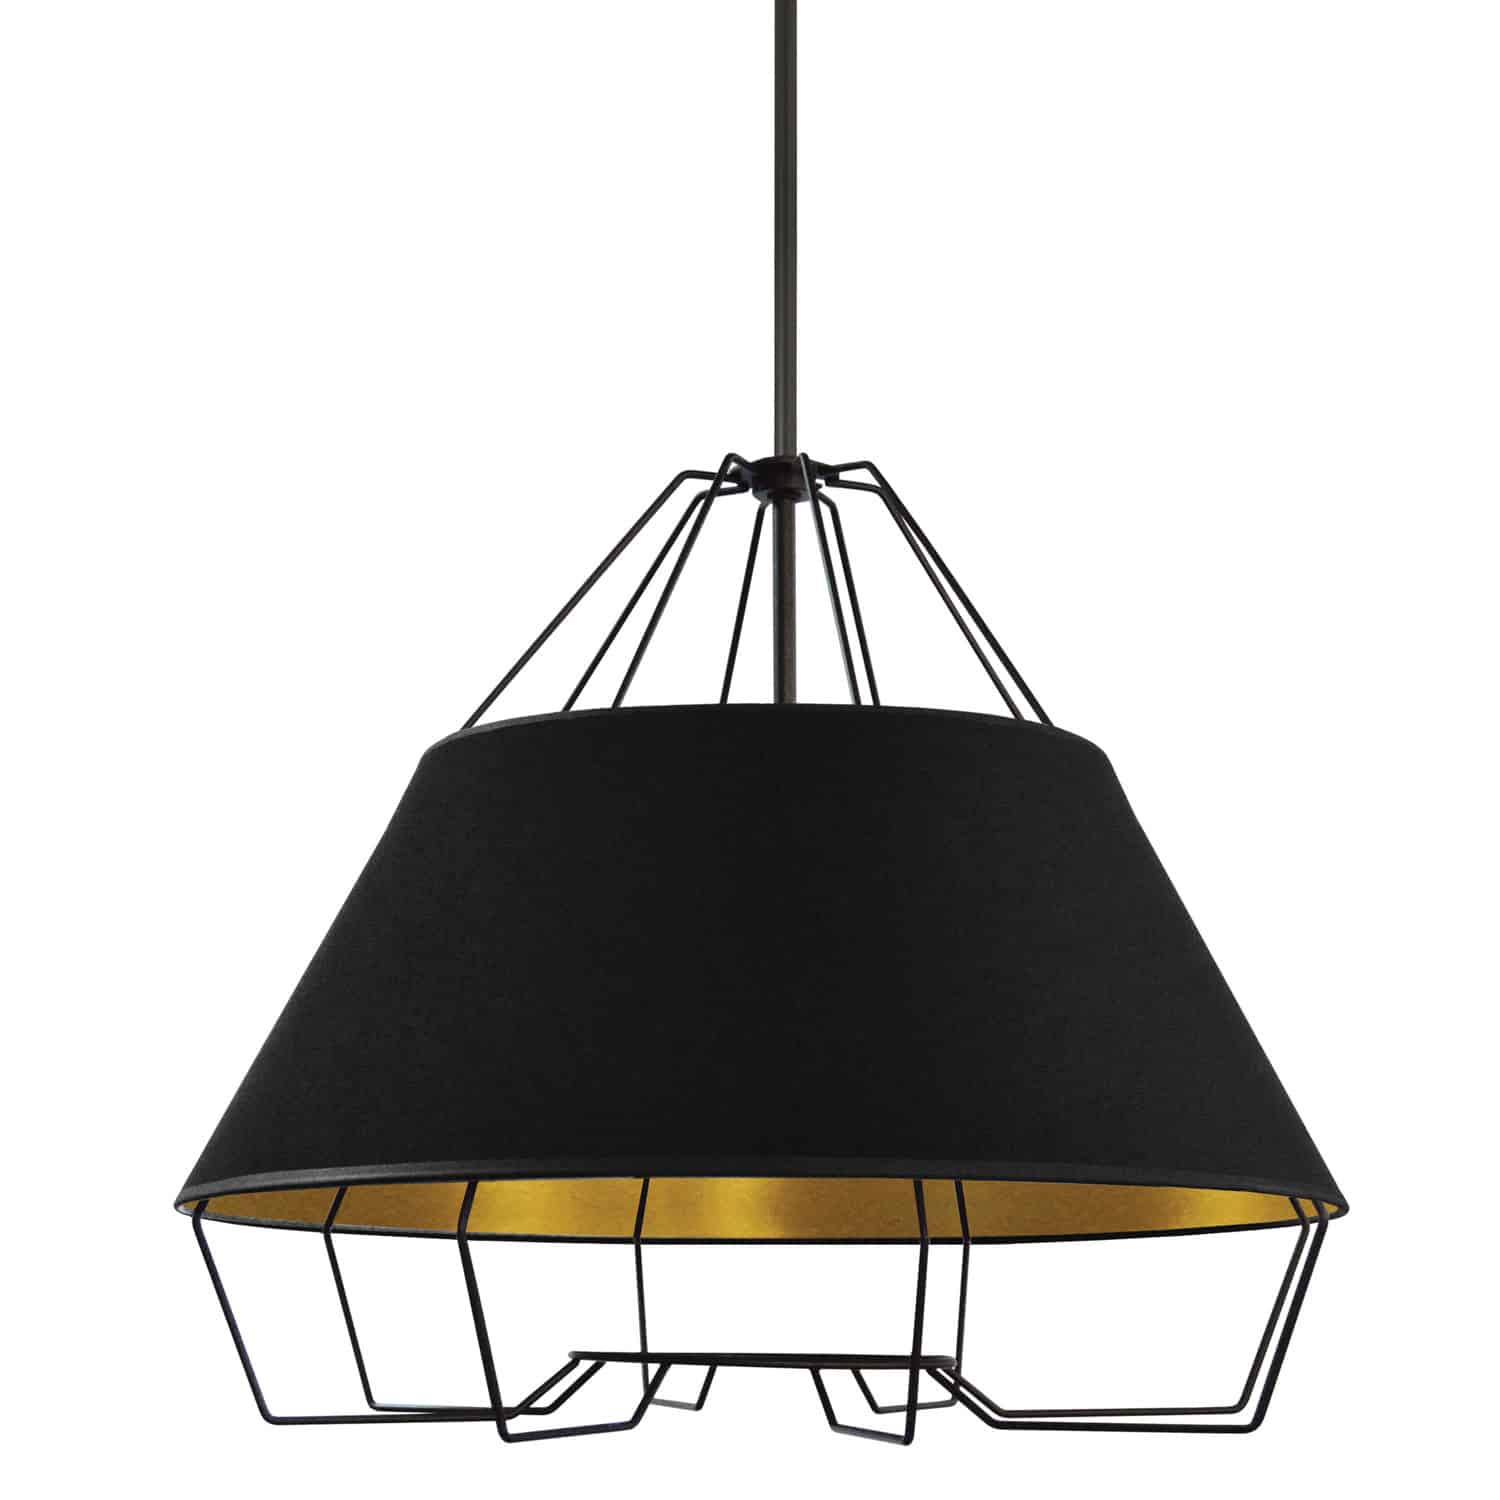 With its eye catching silhouette, the Rockwell family of statement lighting adds artistic flair to your home. A bold horizontal shade and intriguing pattern of vertical lines create the eye-catching contrast. The metal frame in your choice of stylish finish drops down to a bowl style fabric shade. The shade in a choice of colors has a hardback construction and metallic finish interior which reflects the light. It's a look that's substantial, but with an open element that prevents it from becoming overbearing. Rockwell lighting will enhance the furnishings in your dining and living rooms or hallways.